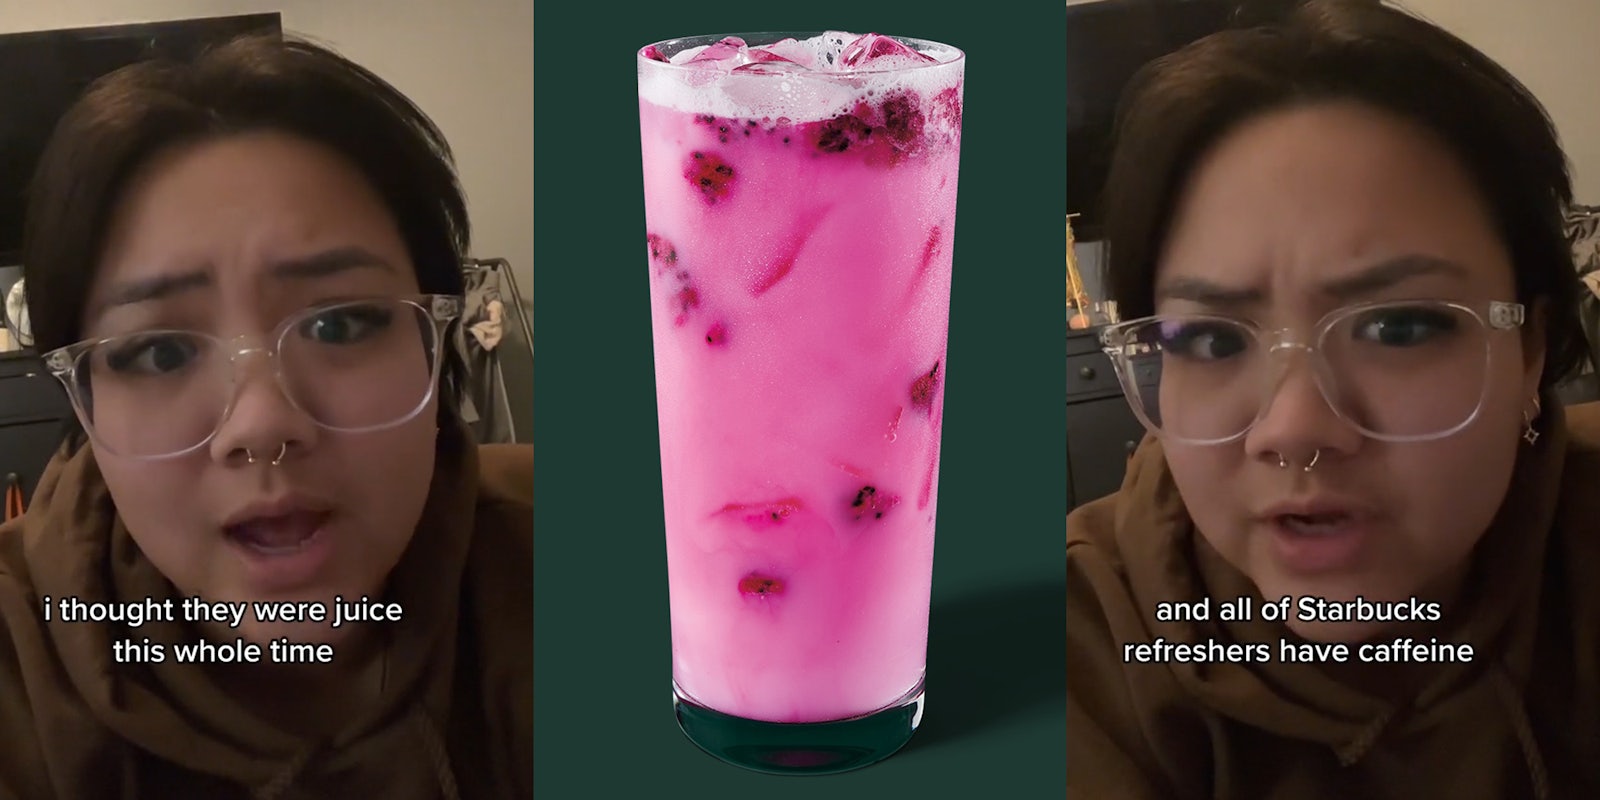 person speaking with caption 'i thought they were juice this whole time' (l) Starbucks Dragon Drink Refresher on green background (c) person speaking with caption 'and all of Starbucks refreshers have caffeine' (r)